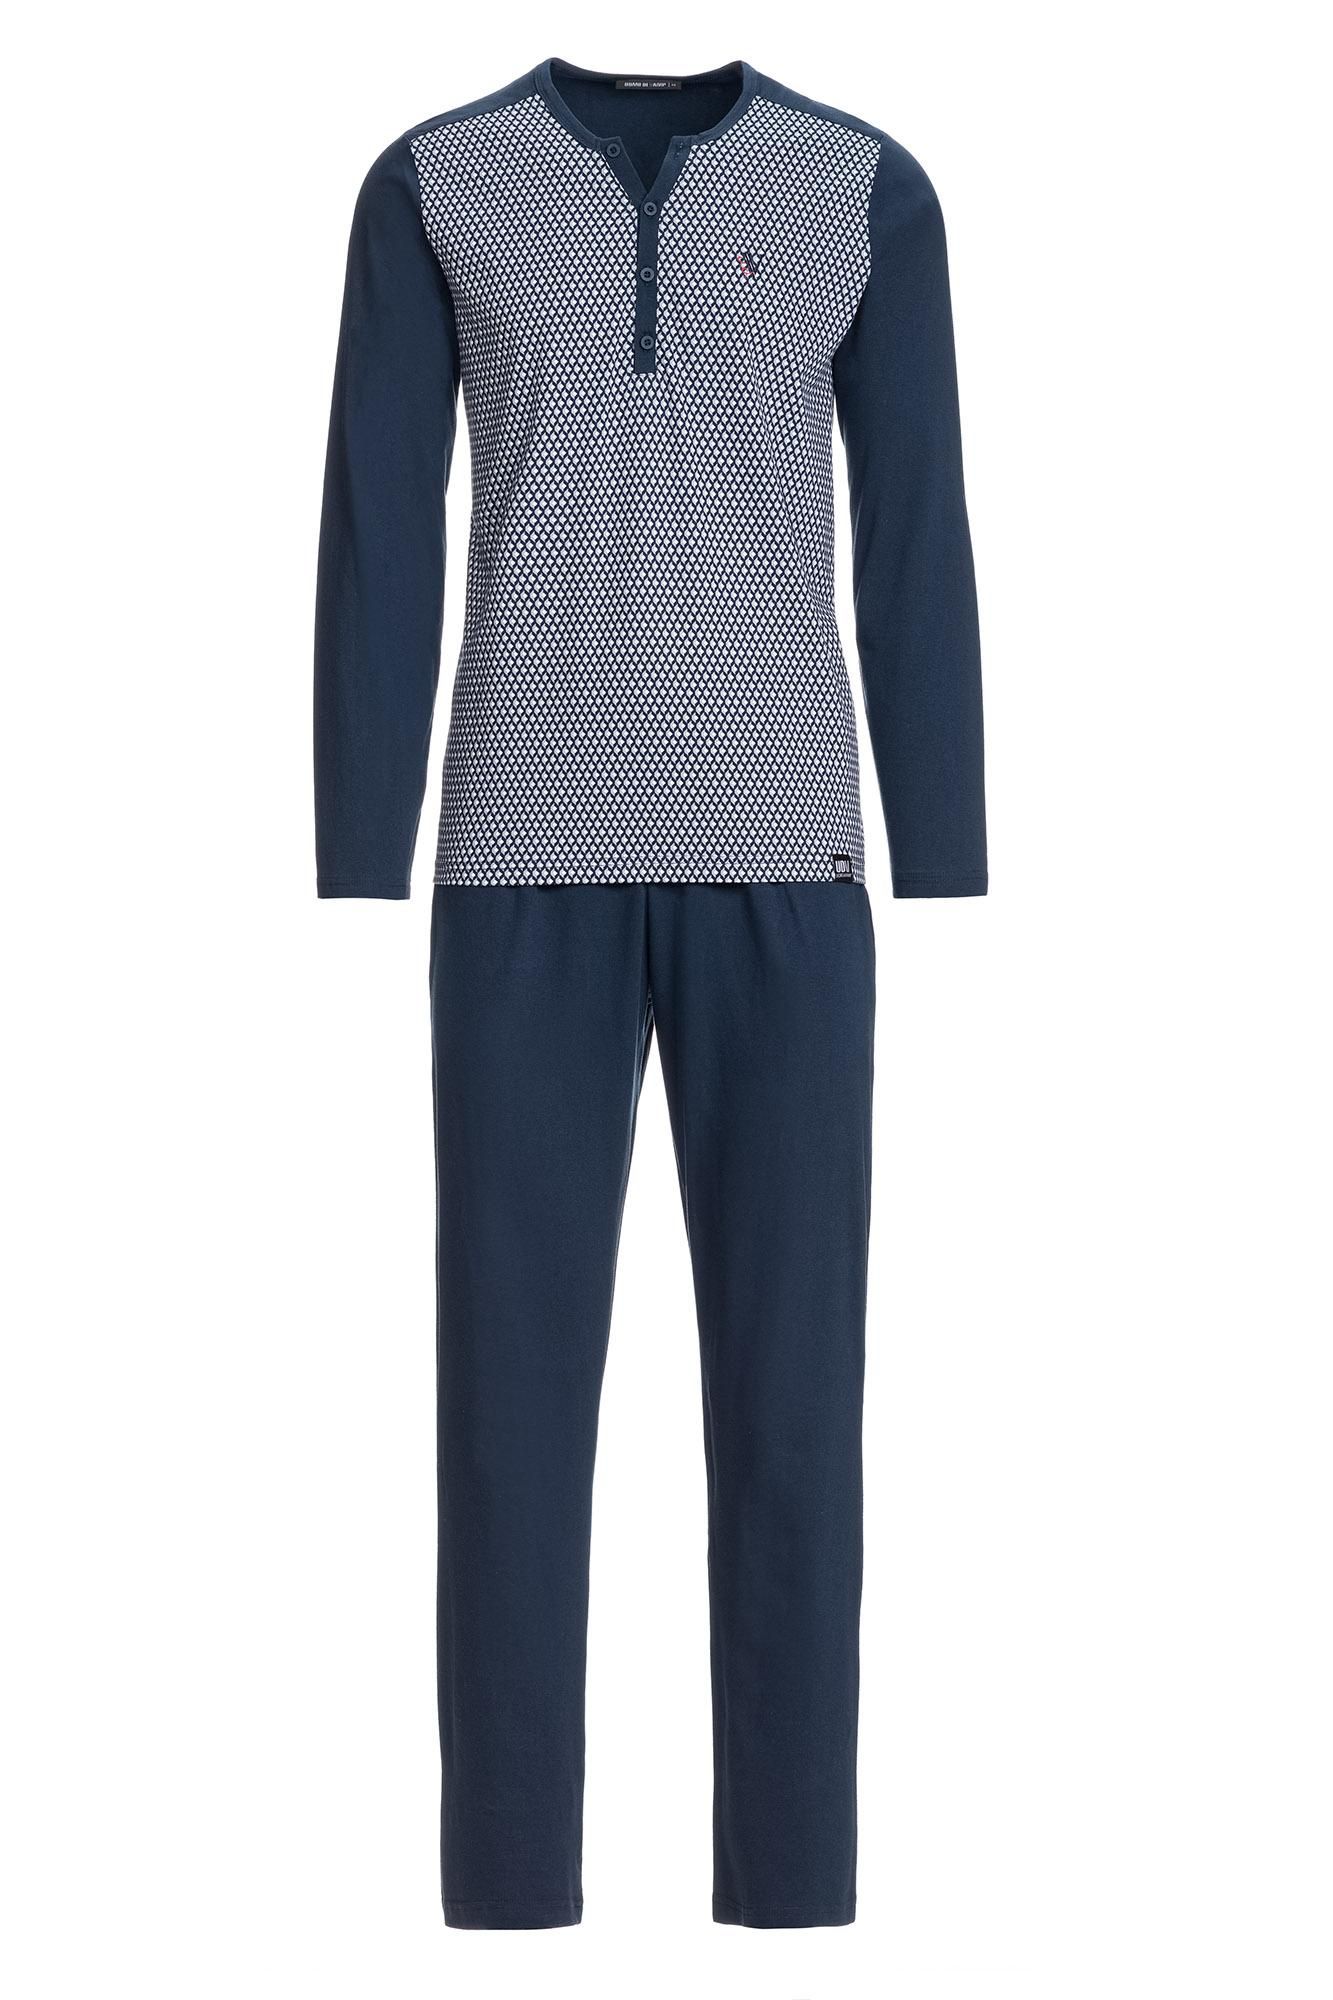 Men’s Patterned Pyjamas with Button Placket